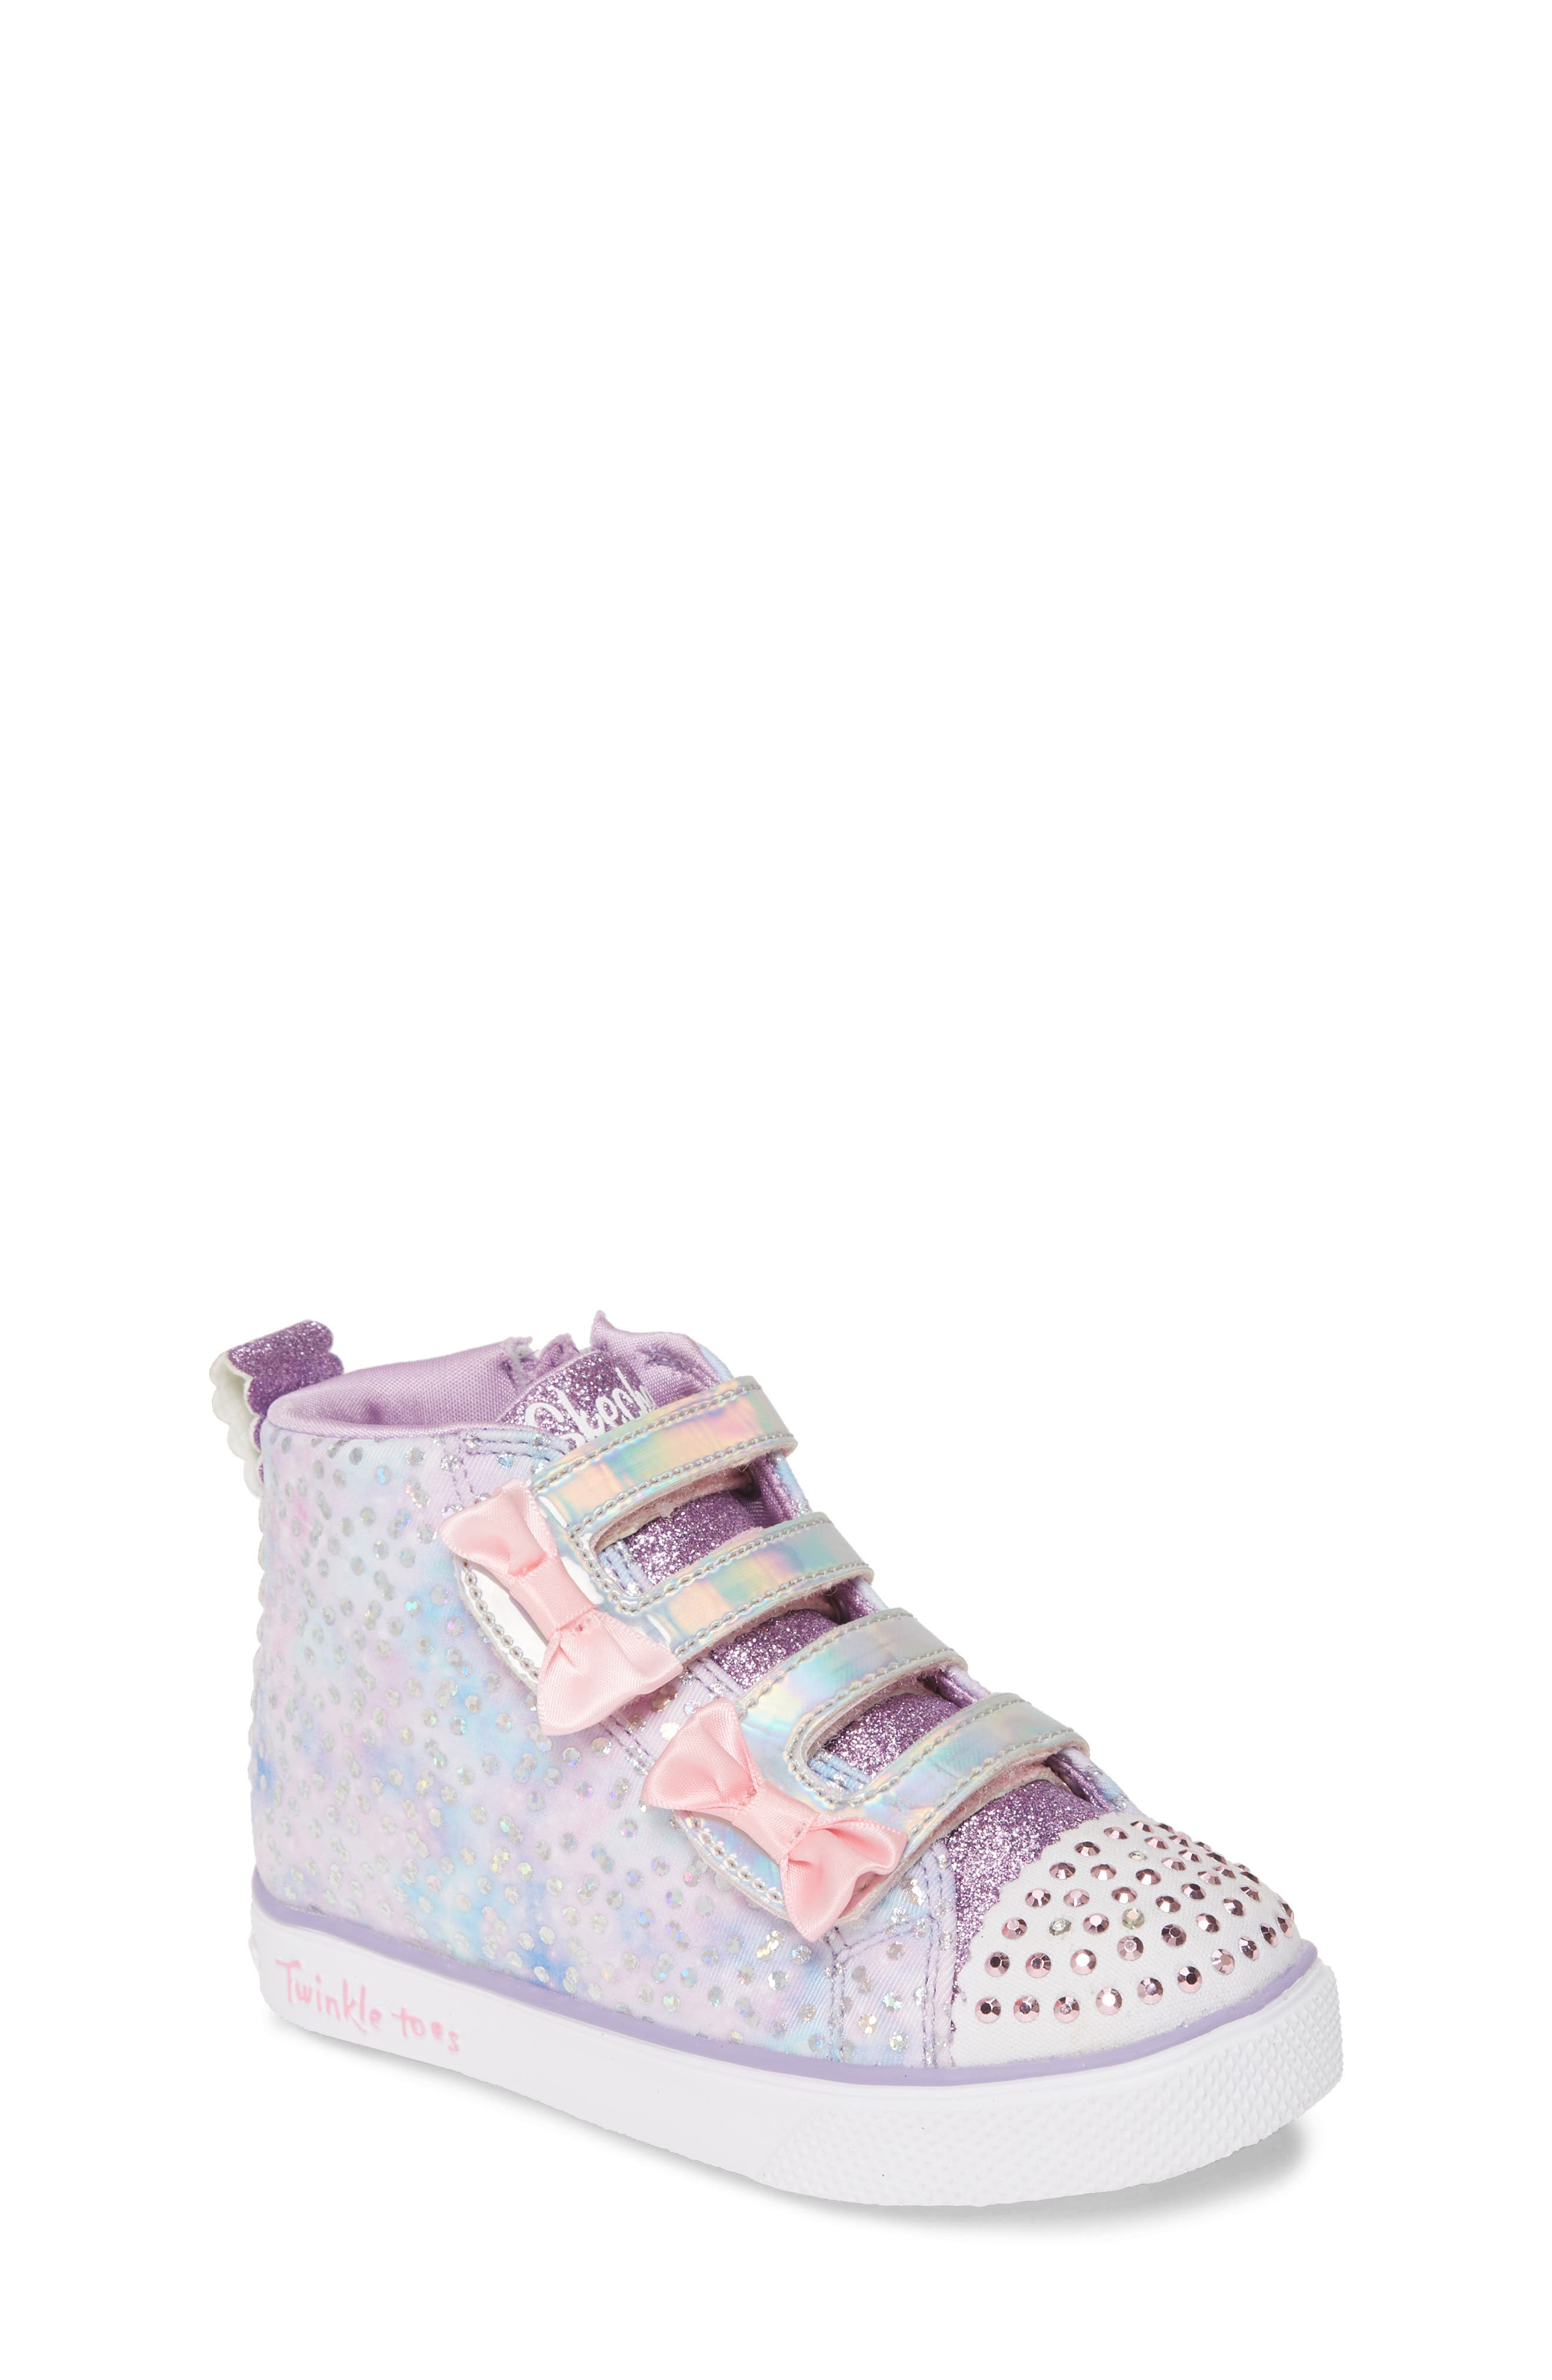 skechers twinkle toes light up toddler